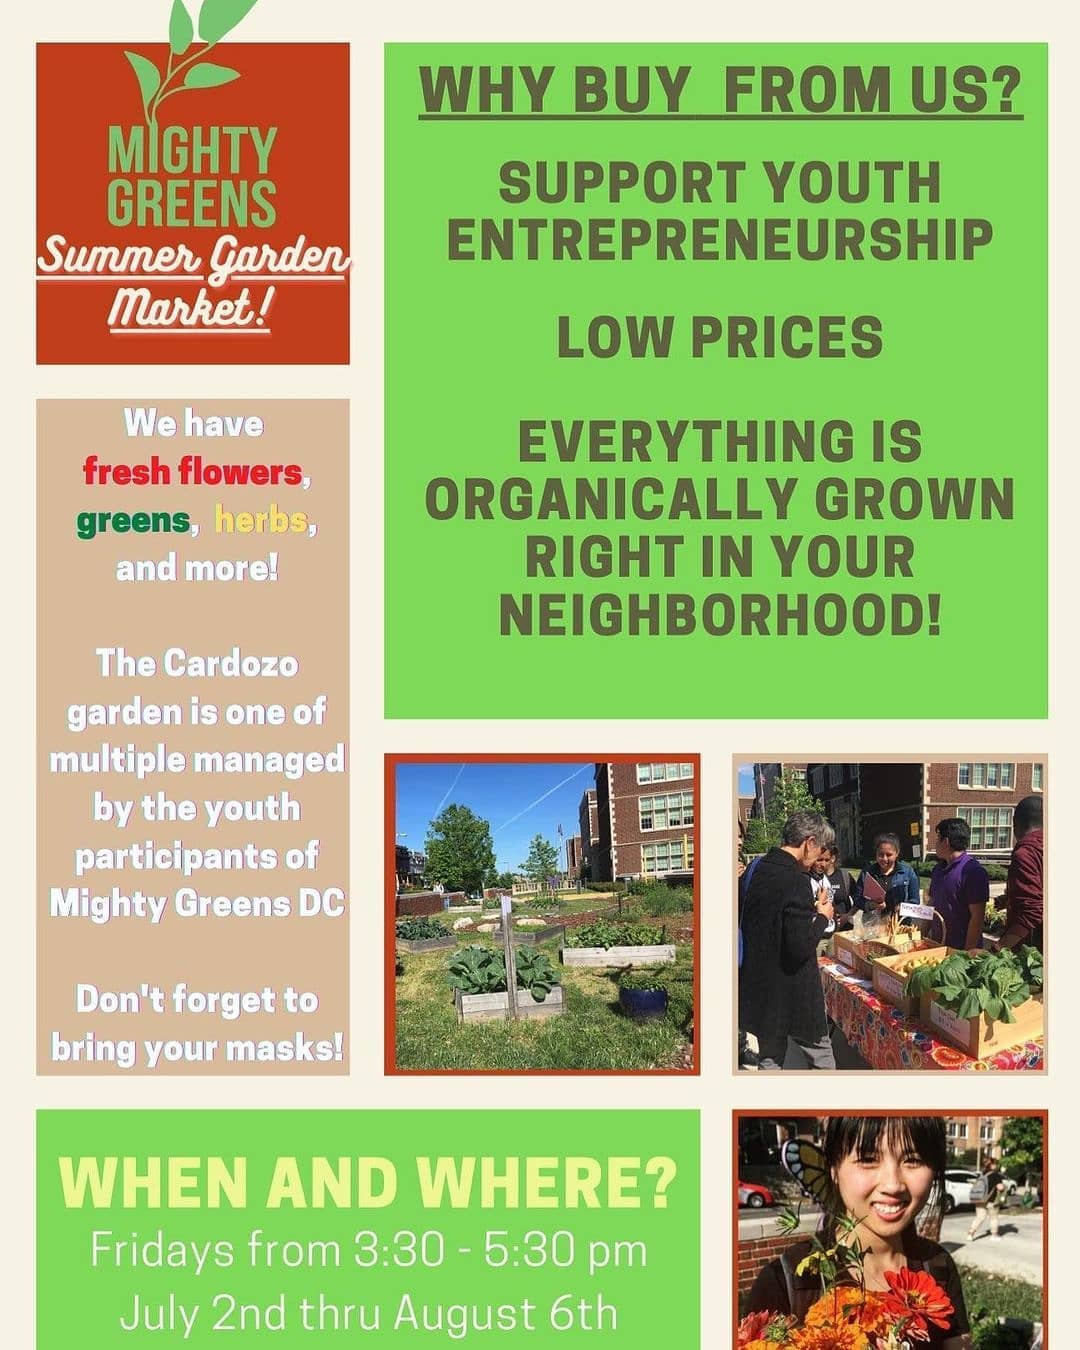 May be an image of 1 person, outdoors, tree and text that says 'WHY BUY FROM US? MIGHTY GREENS Summer Garden Market! SUPPORT YOUTH ENTREPRENEURSHIP LOW PRICES We have fresh flowers, greens, herbs, and more! EVERYTHING IS ORGANICALLY GROWN RIGHT IN YOUR NEIGHBORHOOD! The Cardozo garden is one of multiple managed by the youth participants of Mighty Greens DC Don't forget to bring your masks! WHEN AND WHERE? Fridays from 3:30 5:30 pm July 2nd thru August 6th'